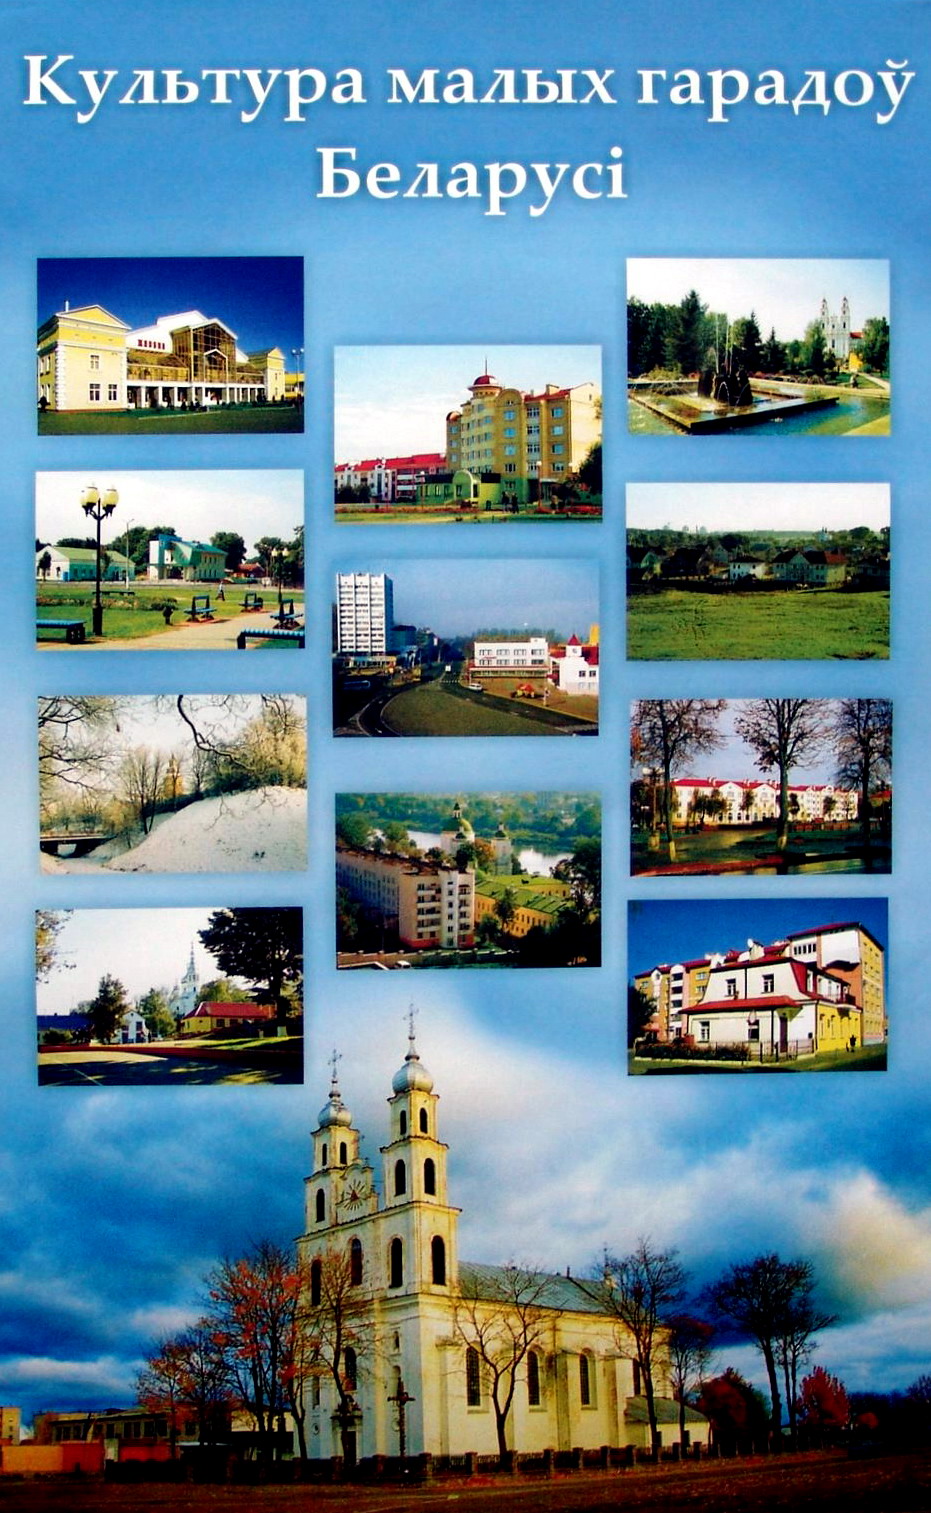 Culture of Belarusian Towns